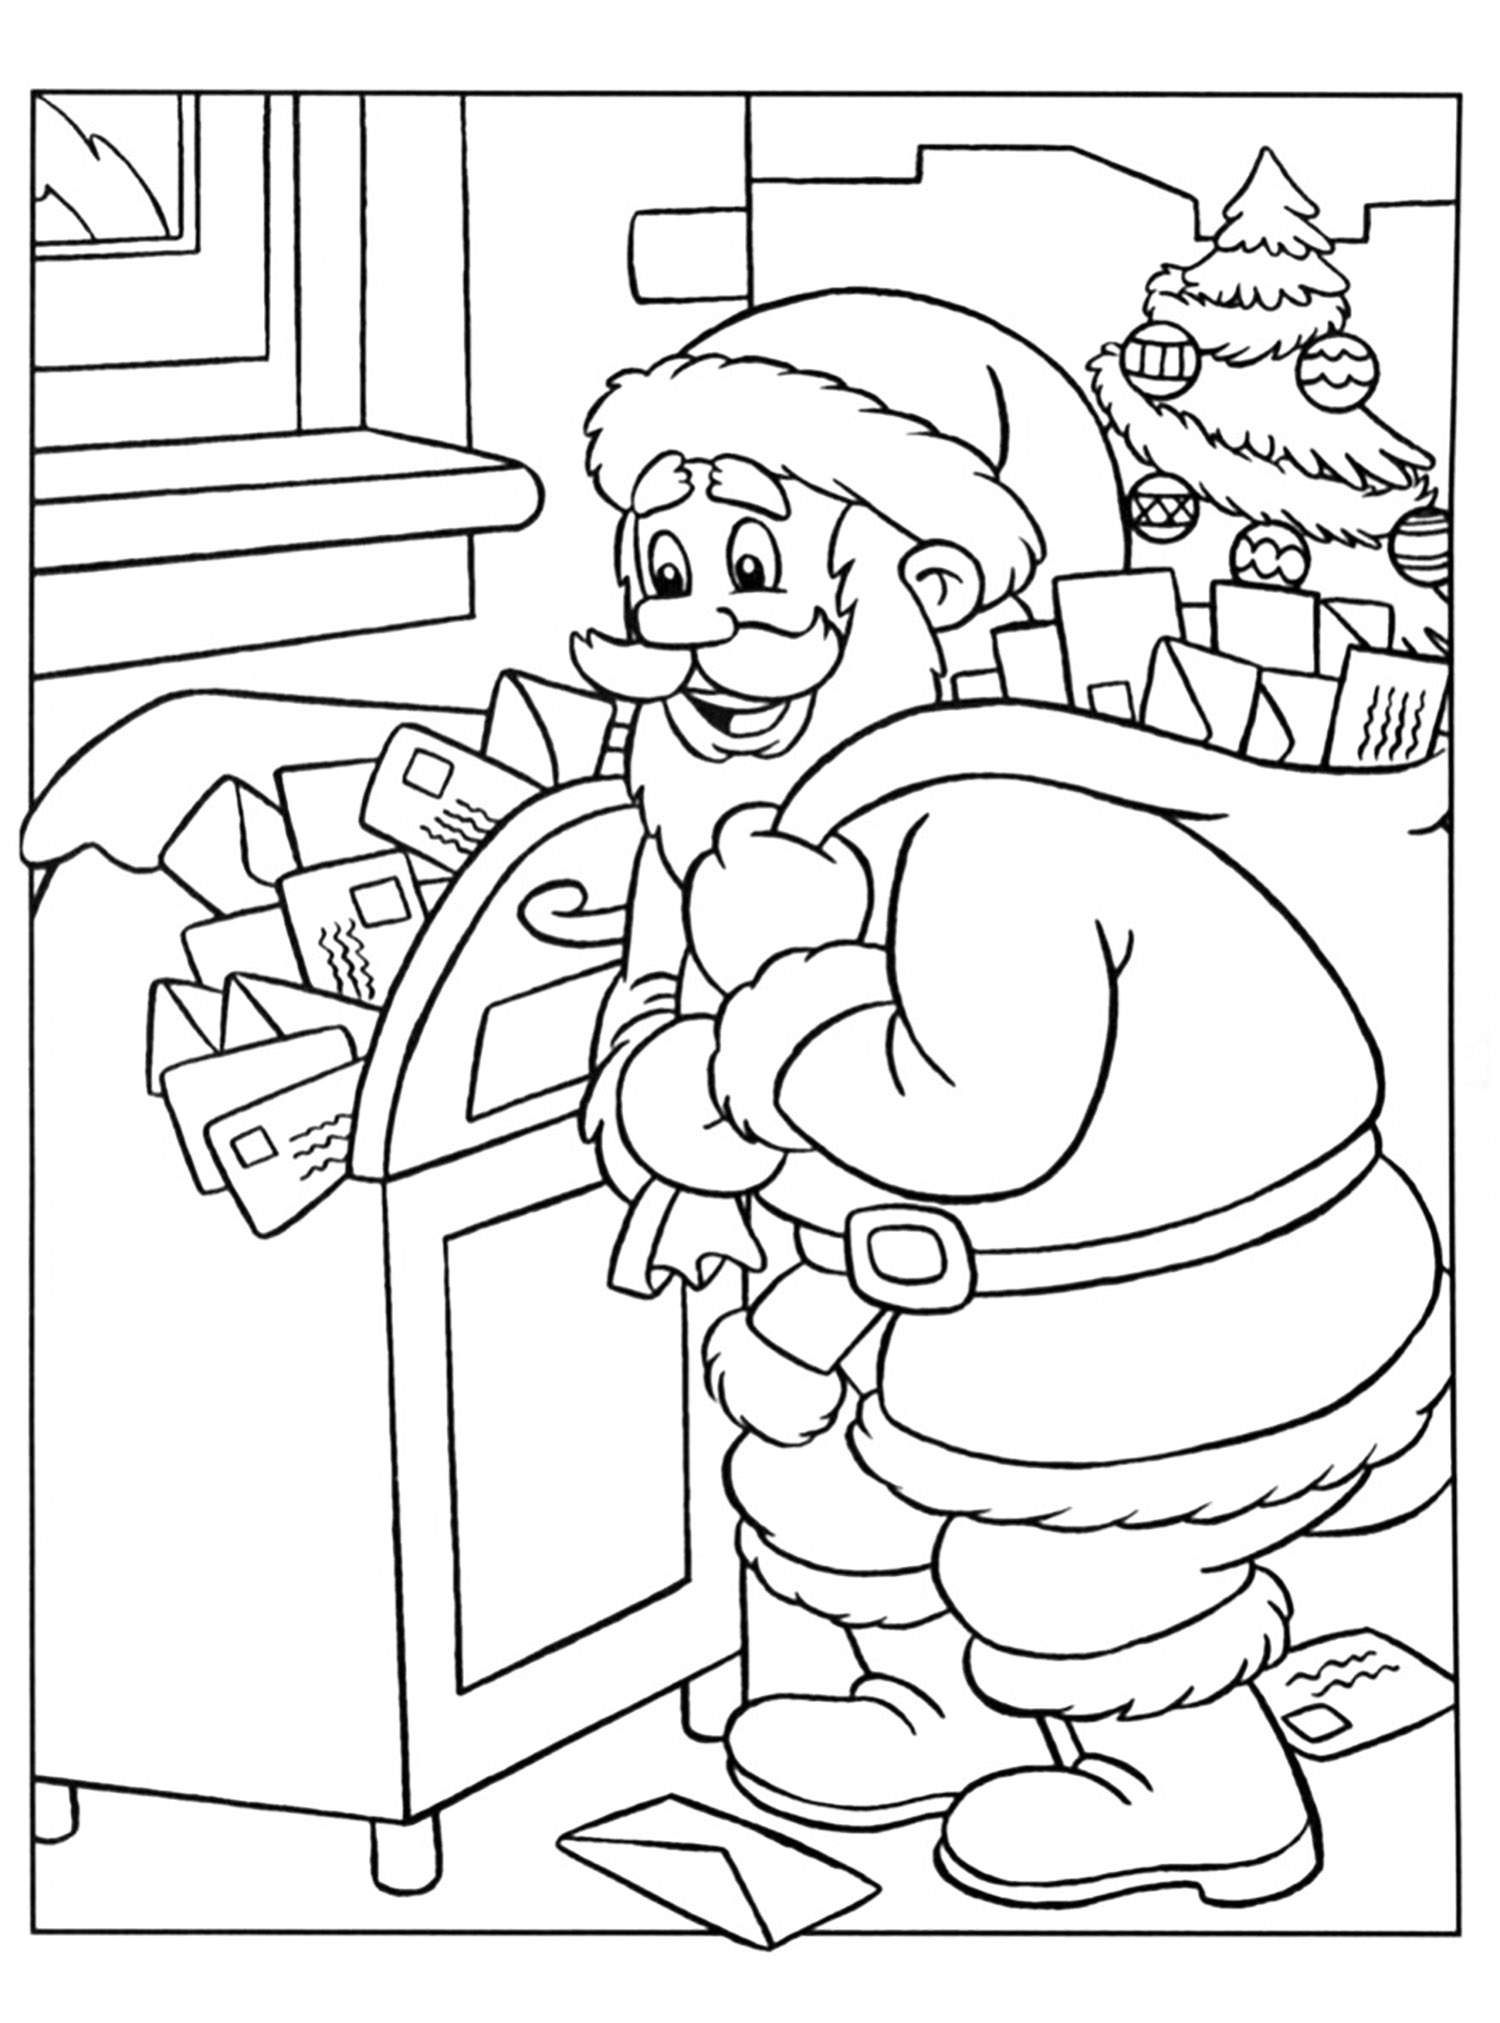 Santa claus and his letters - Christmas Coloring pages for kids to